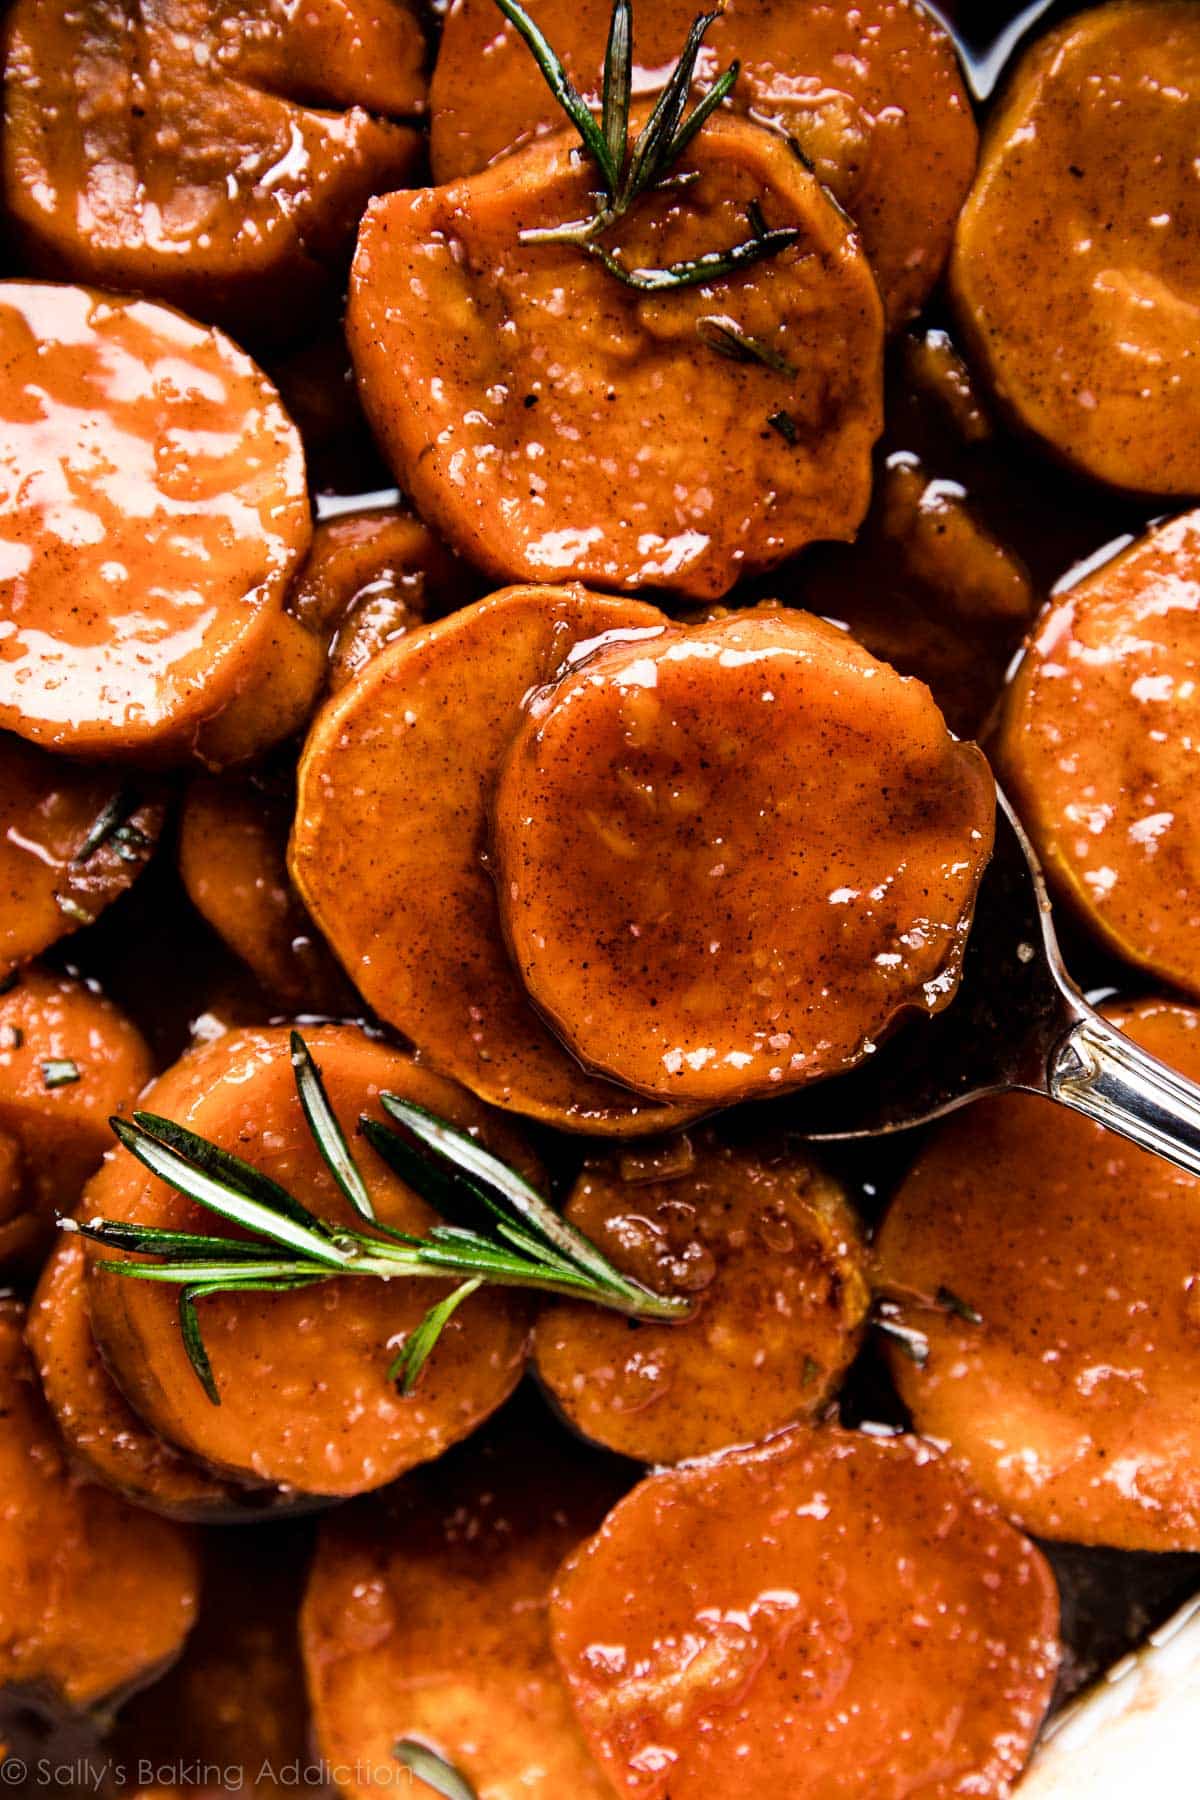 A pan of candied sweet potatoes garnished with rosemary.